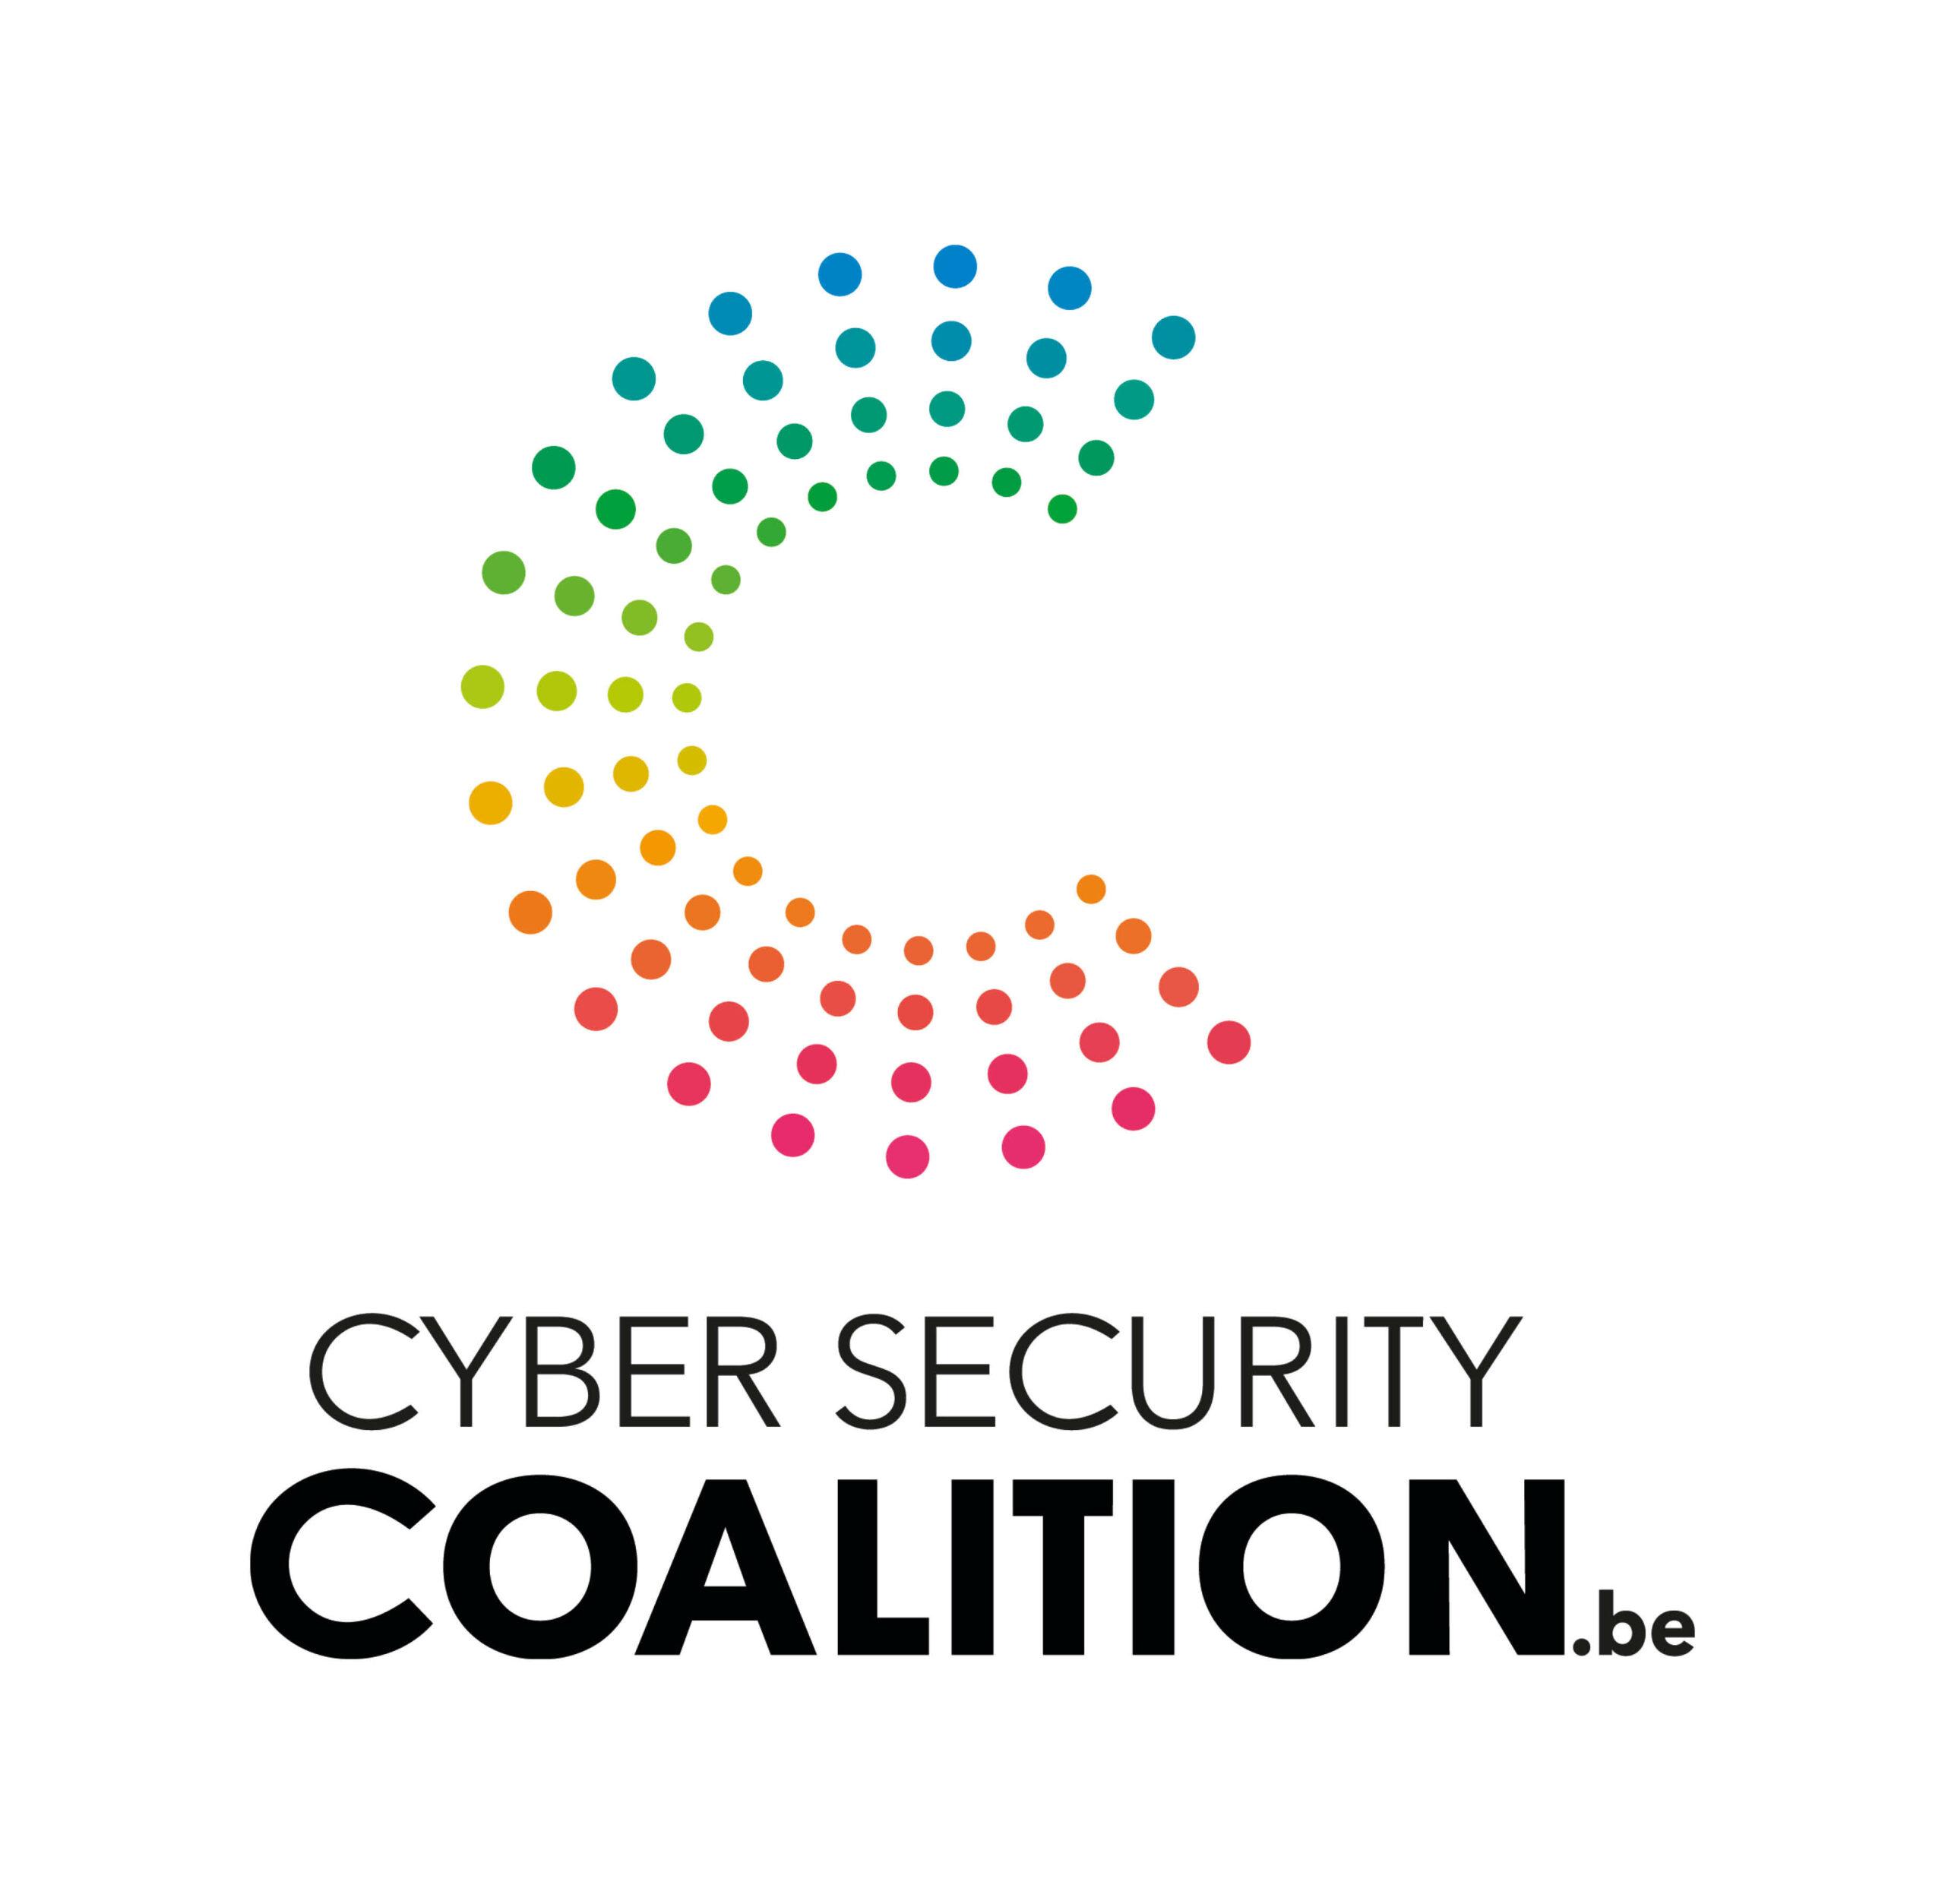 coalition iscf scaled | Industrial Cybersec Forum,